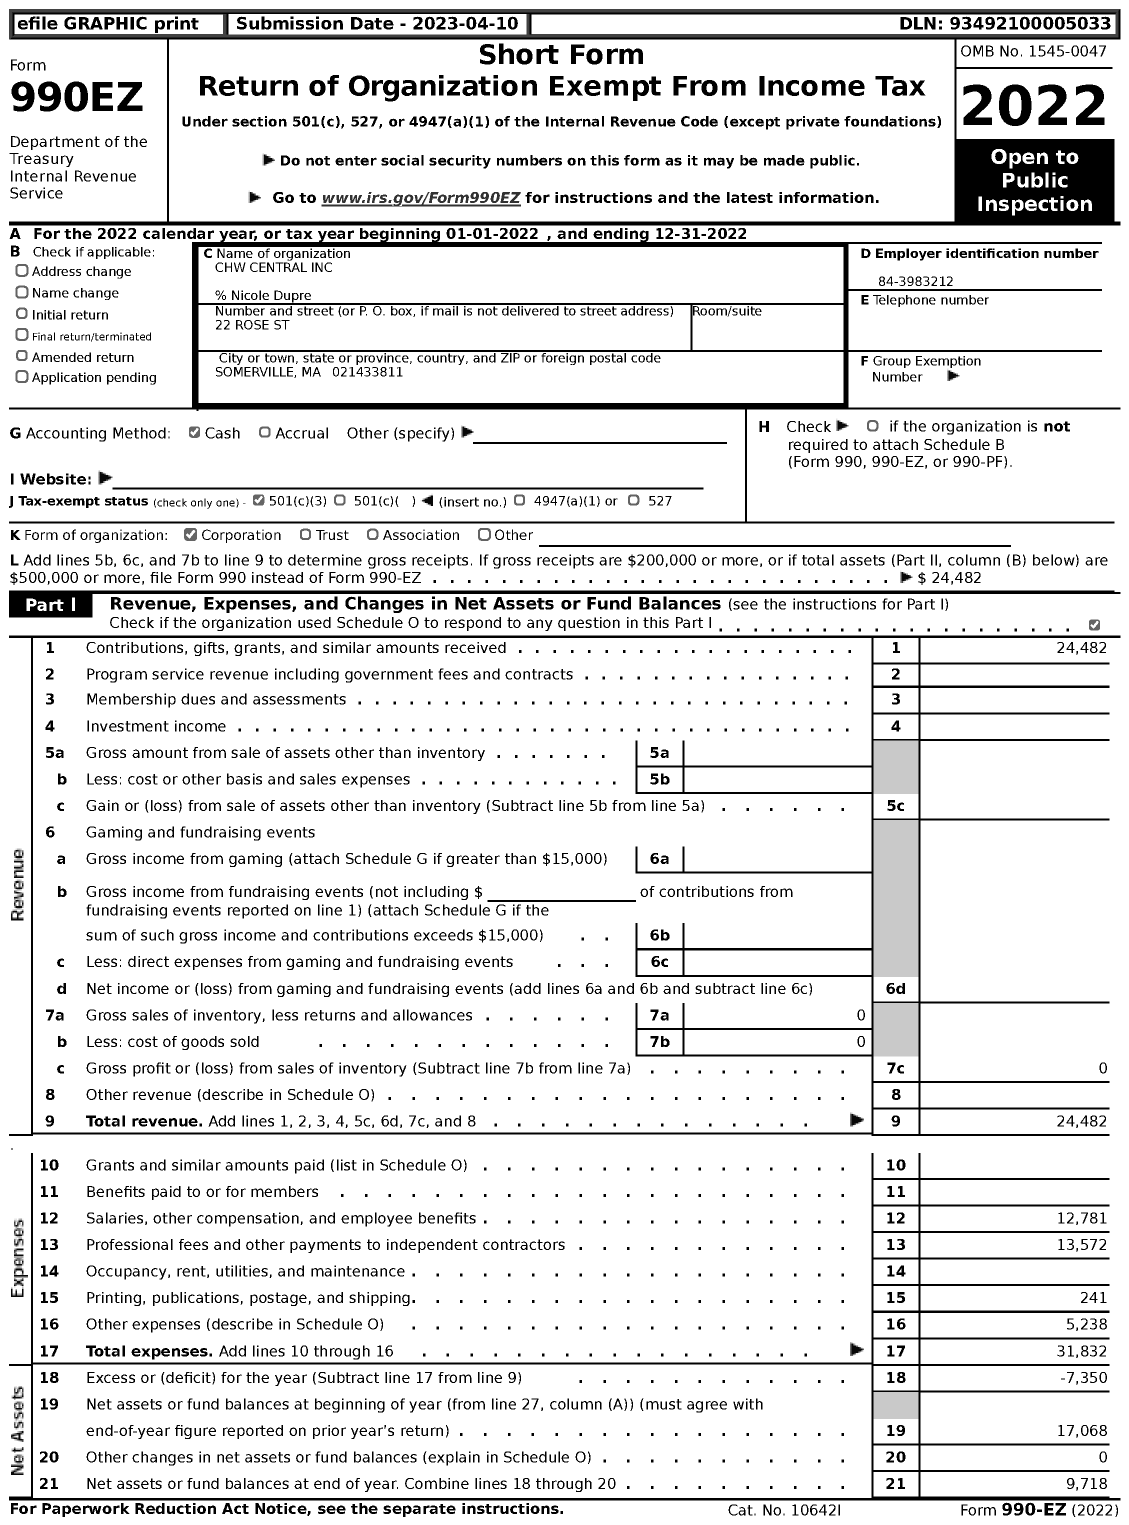 Image of first page of 2022 Form 990EZ for CHW Central